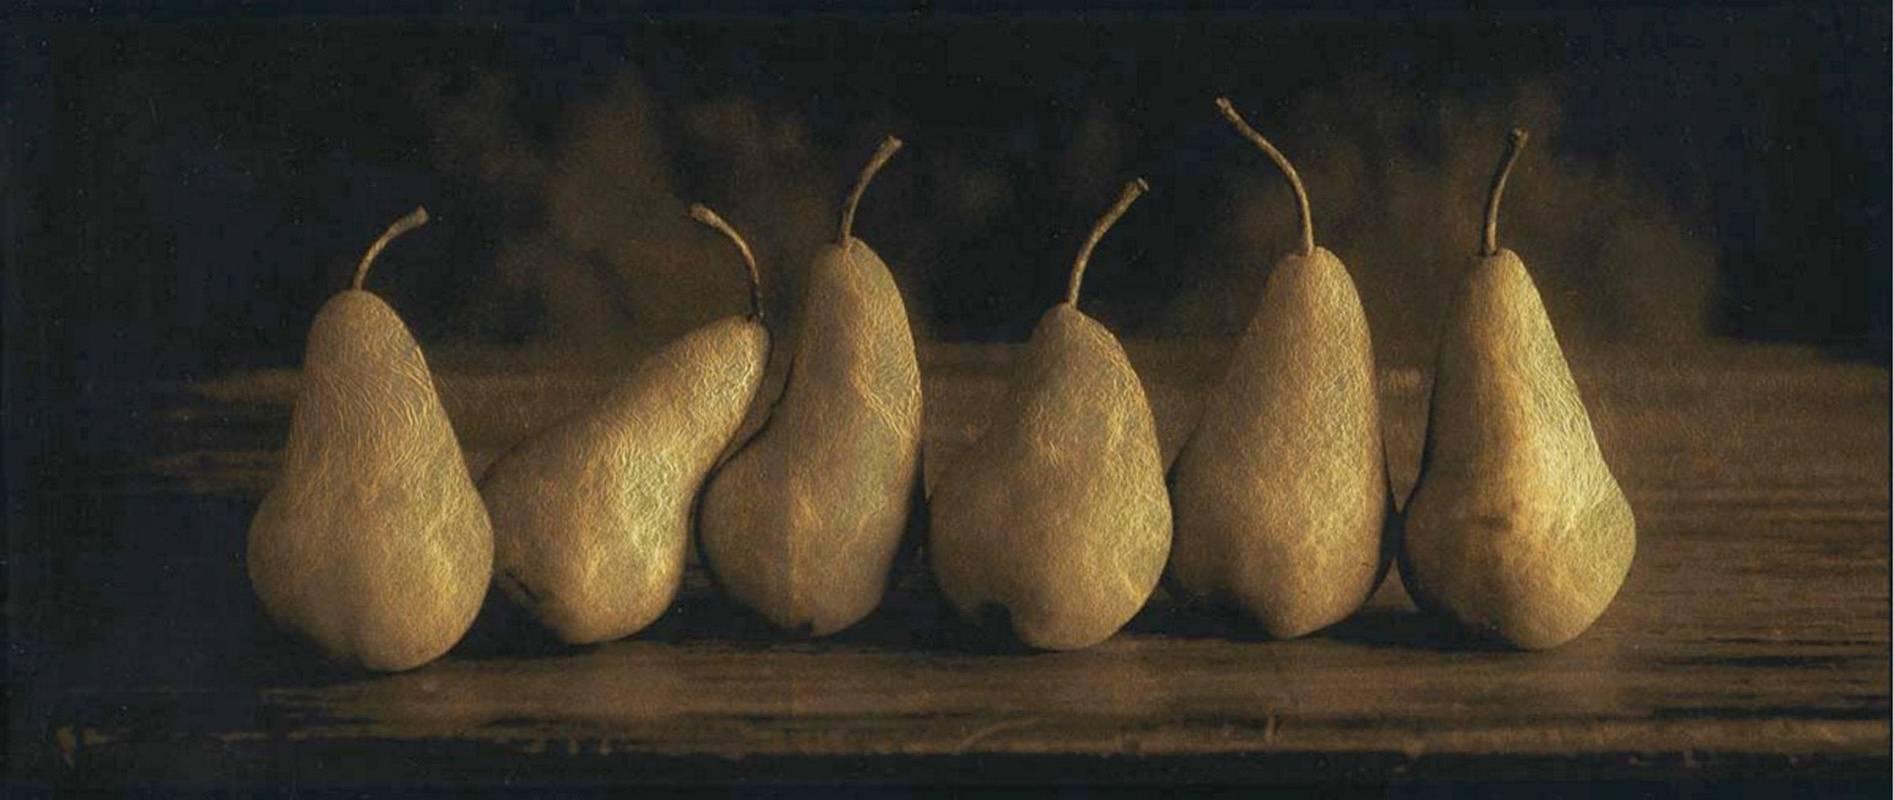 Six Pears - Photograph by Kate Breakey